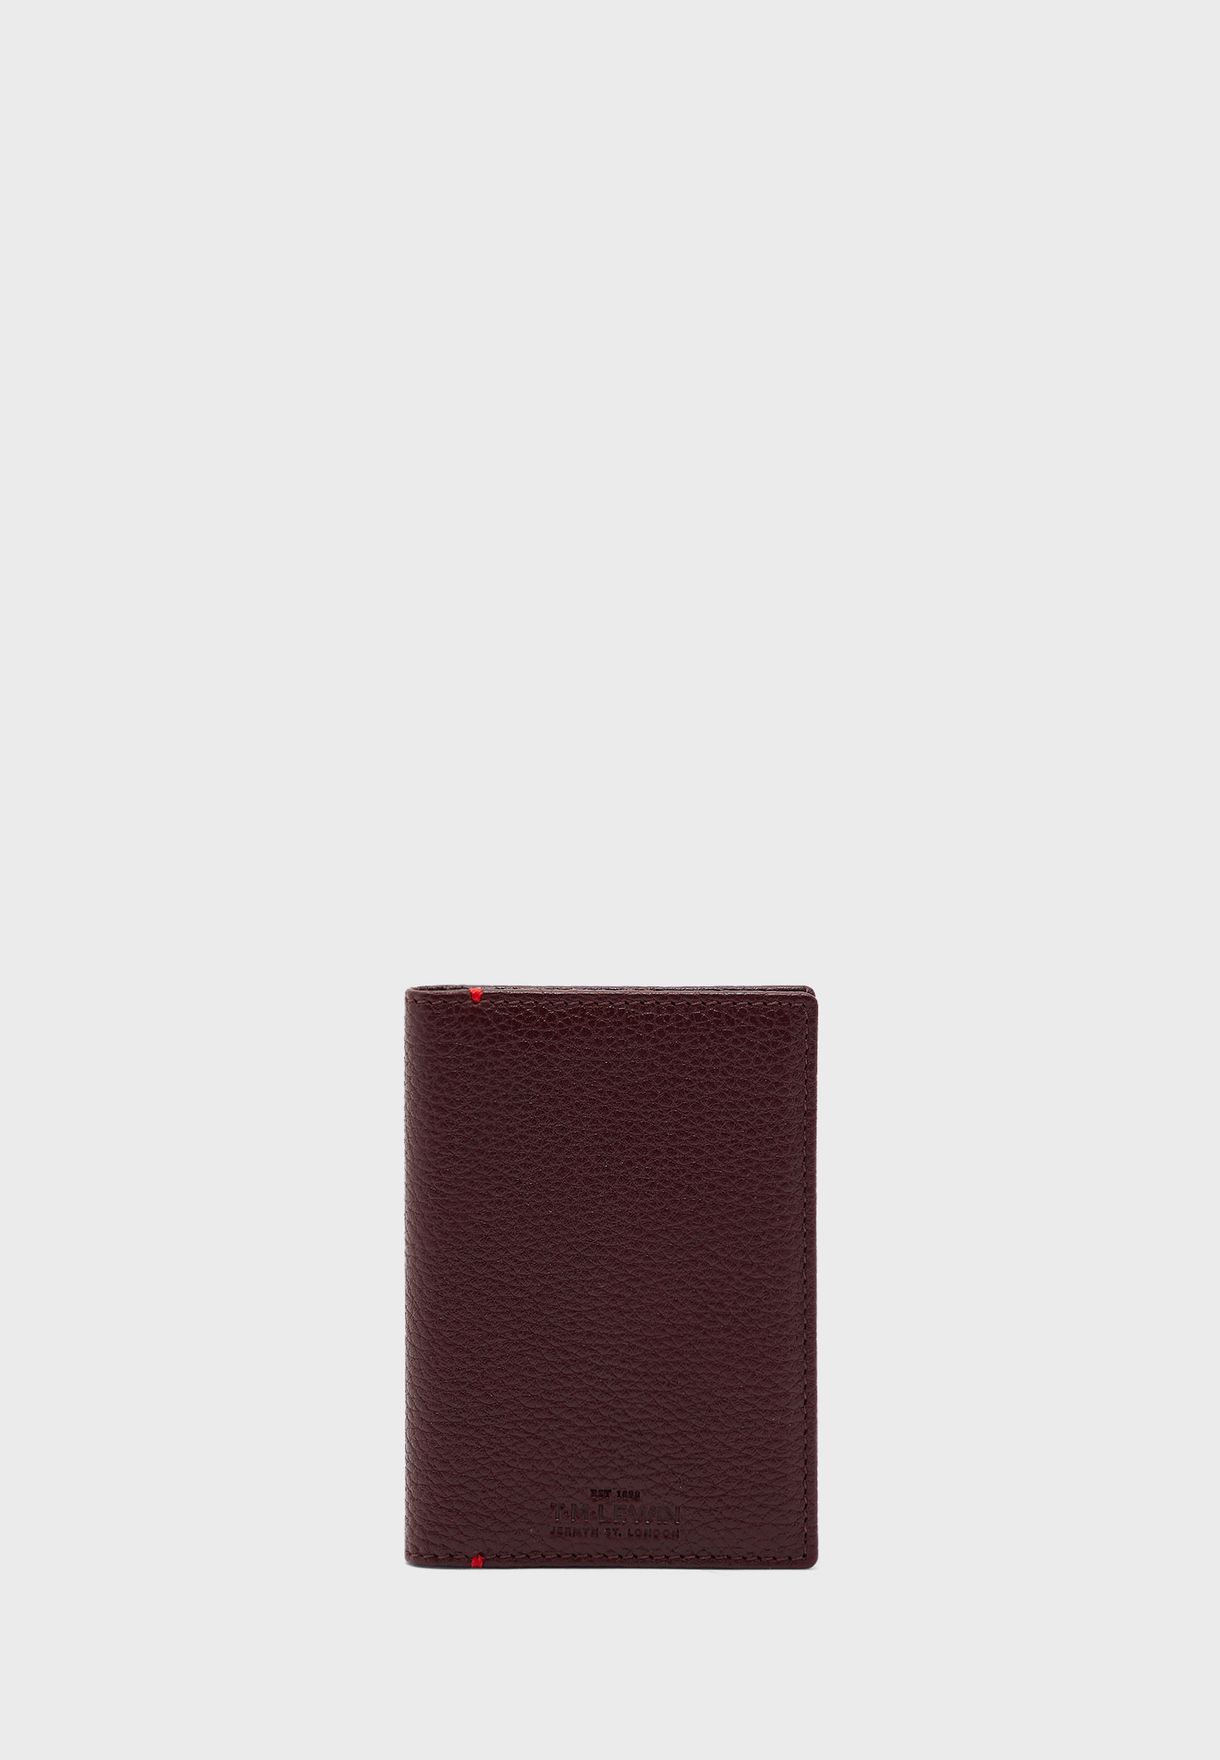 T.M.Lewin Mens Leather Bifold Cardholder Brown 